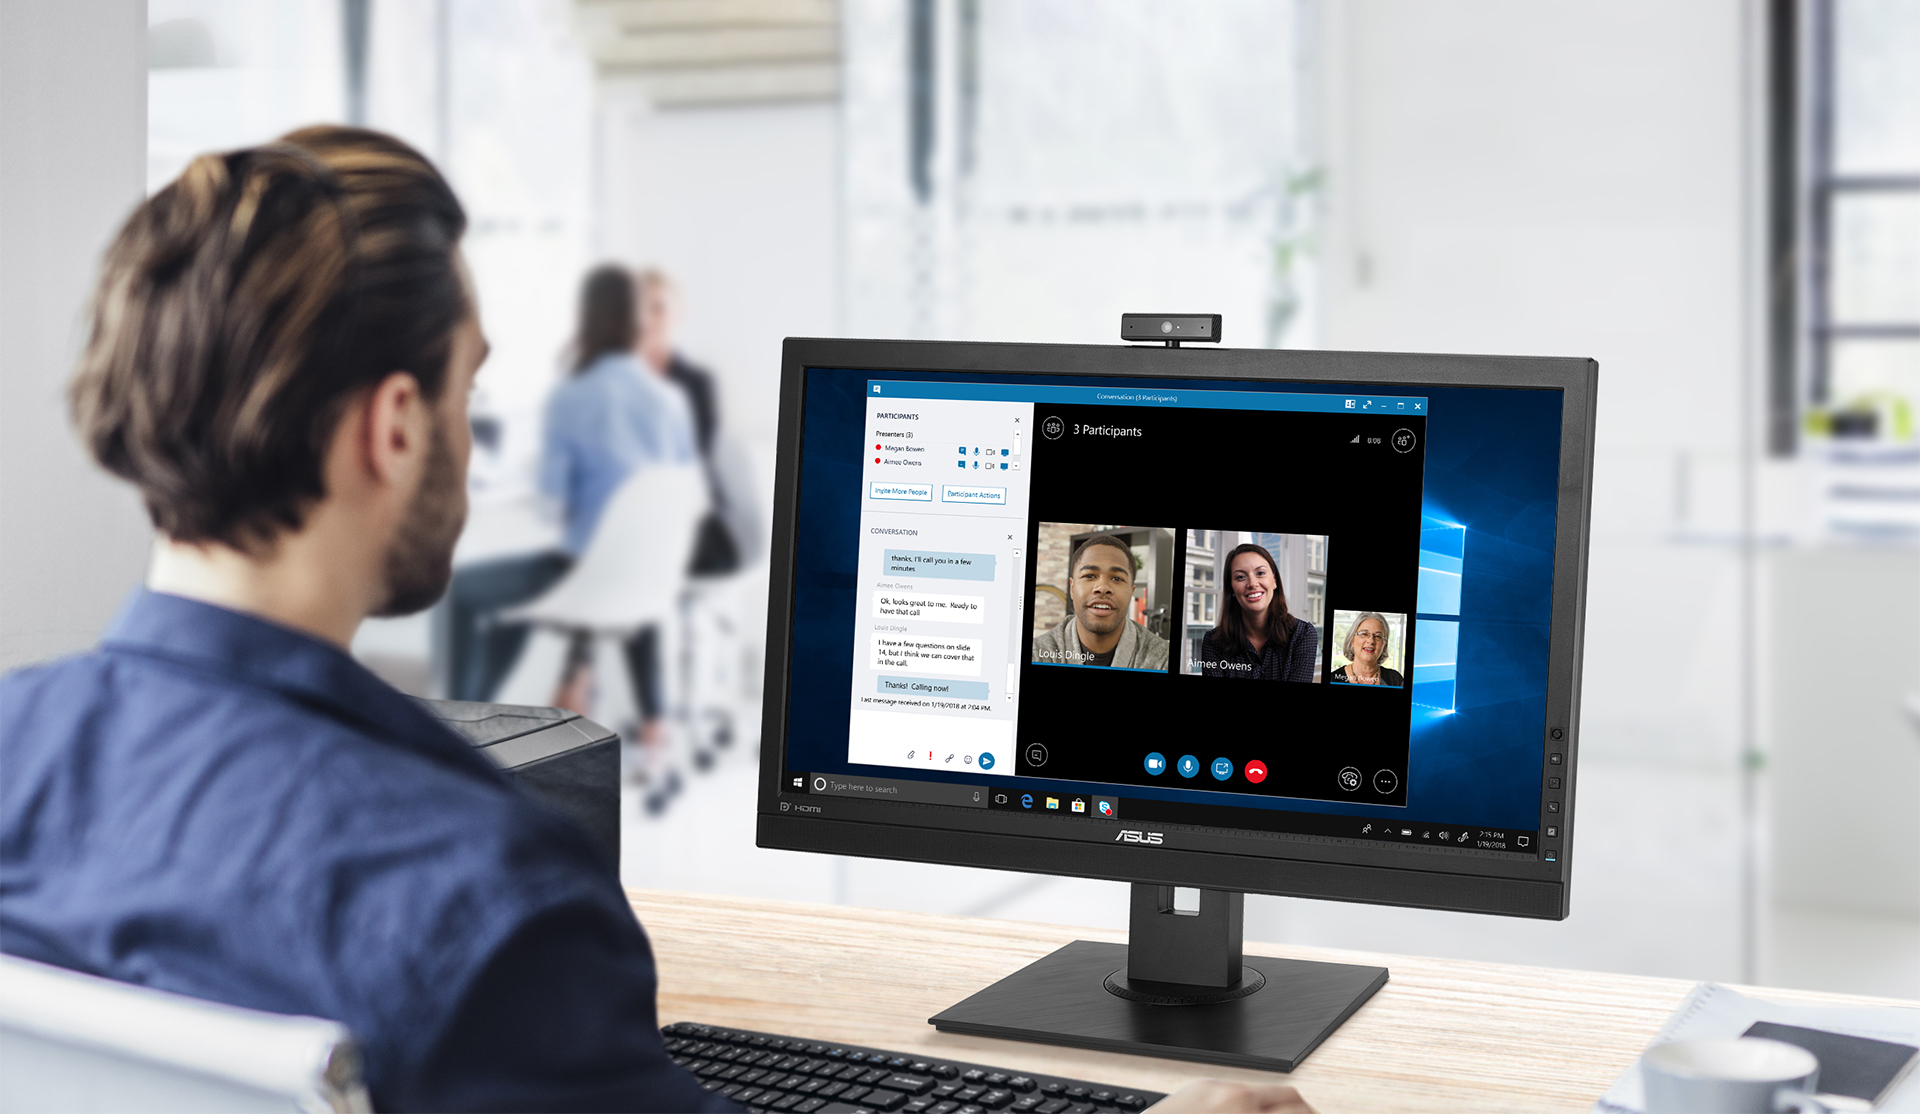 BE24DQLB is a 23.8-inch Full HD monitor that features an integrated Full HD (2MP) webcam, microphone array and stereo speakers for video conferencing and live-streaming.